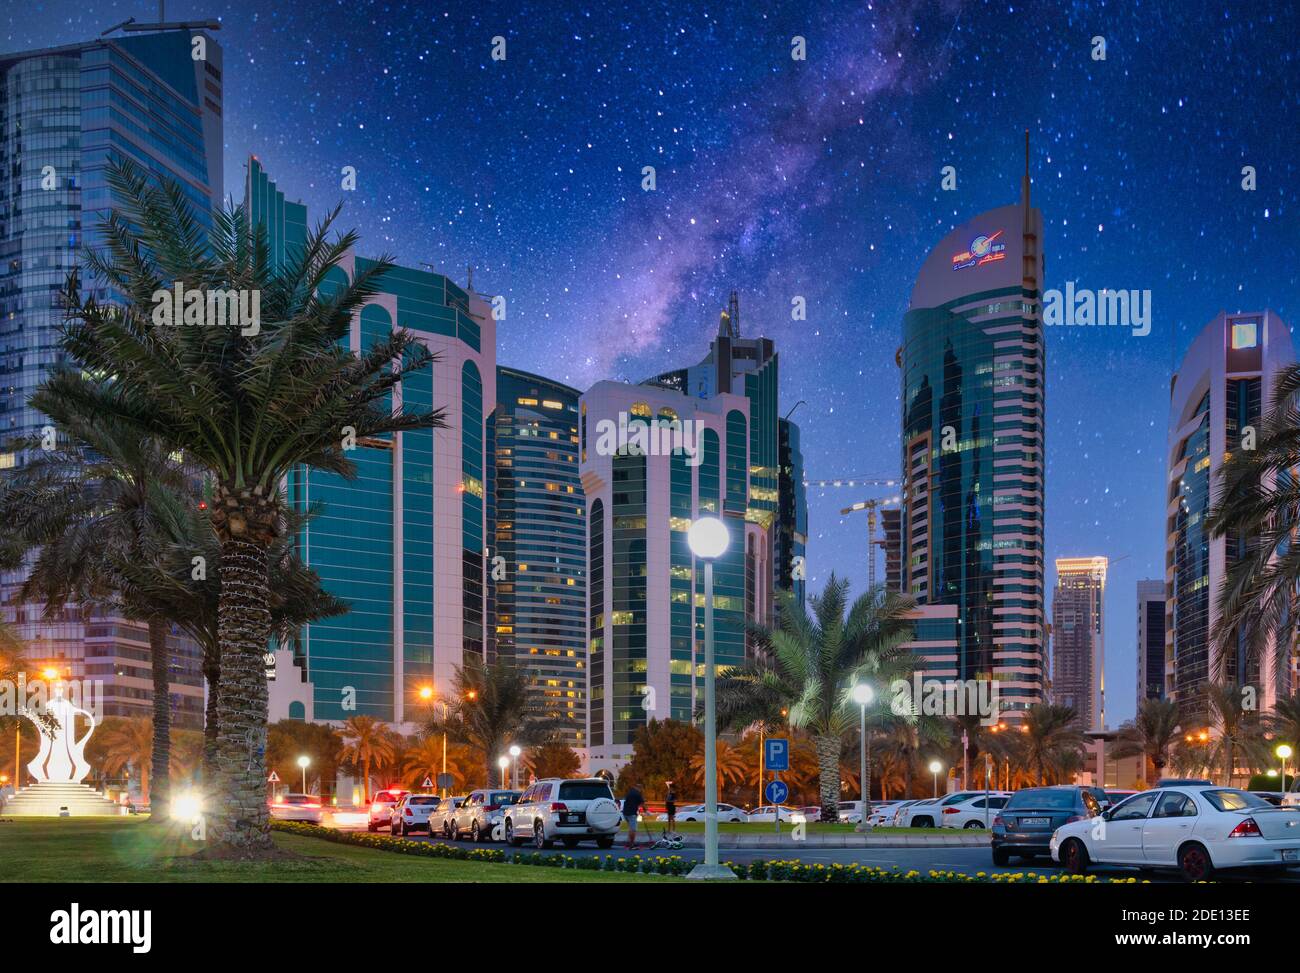 Doha Qatar skyline at night from Sheraton park  with cars , people in street and stars in the sky Stock Photo